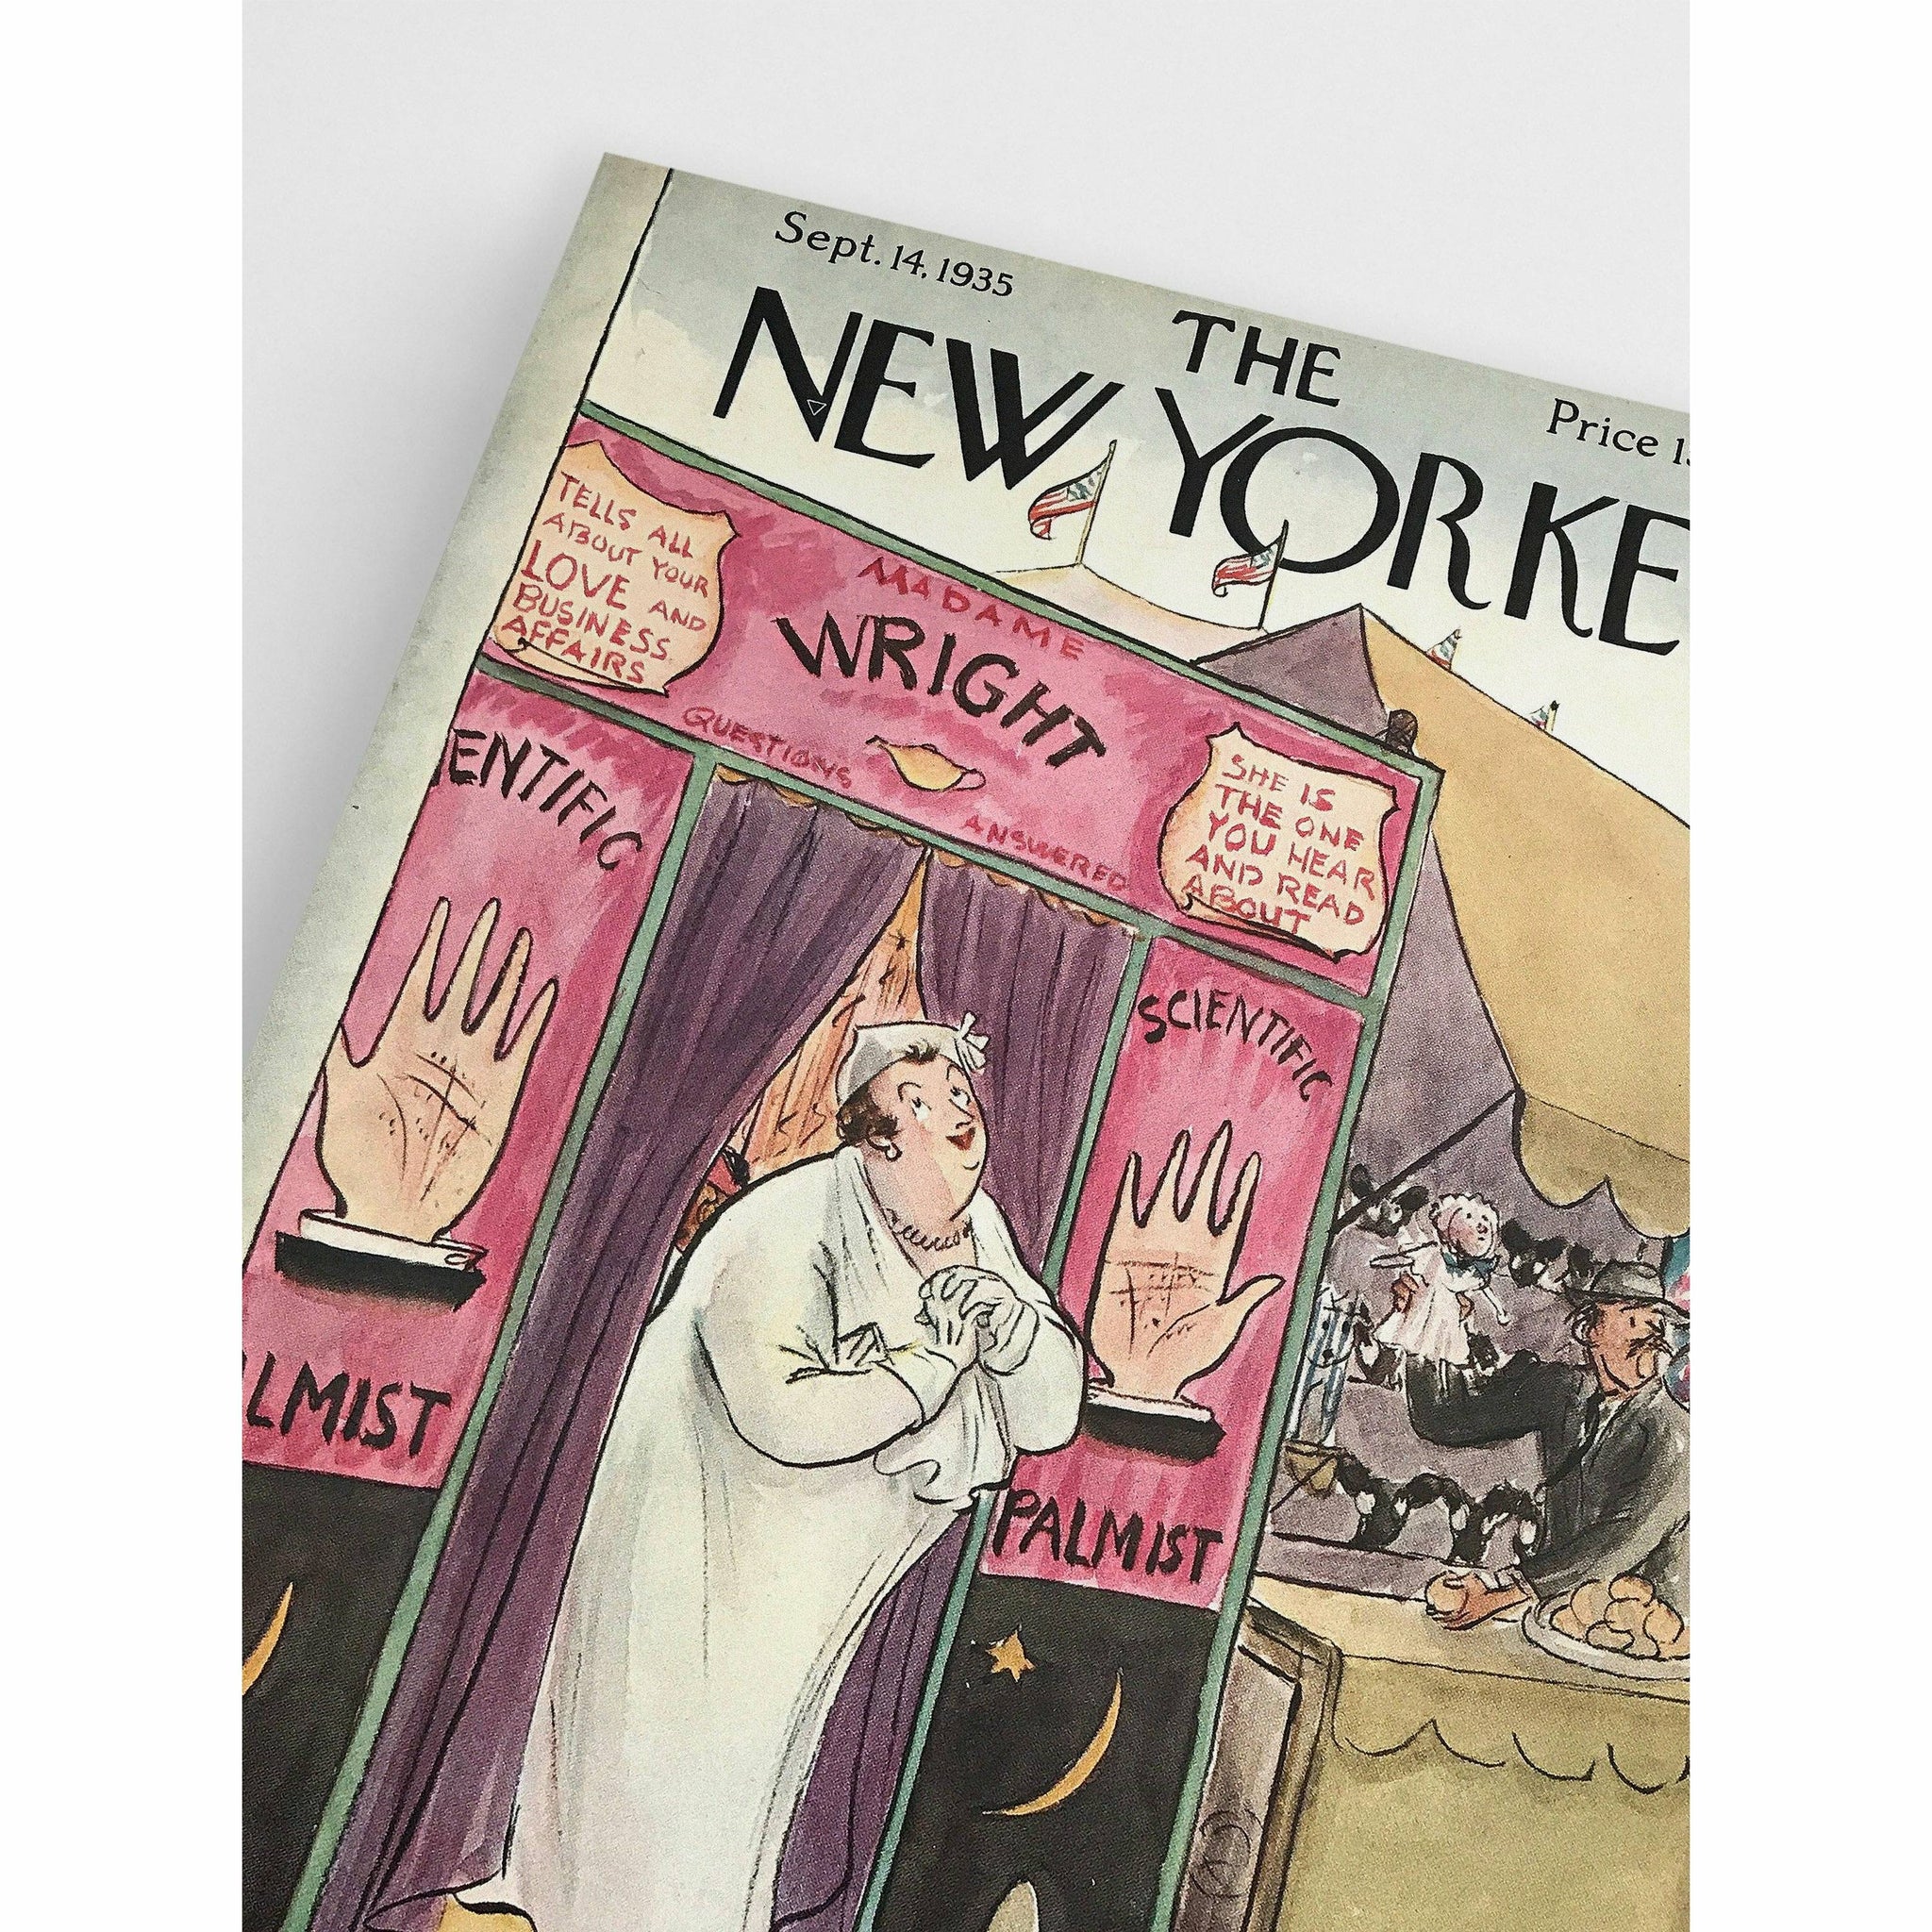 The New Yorker Digital Poster